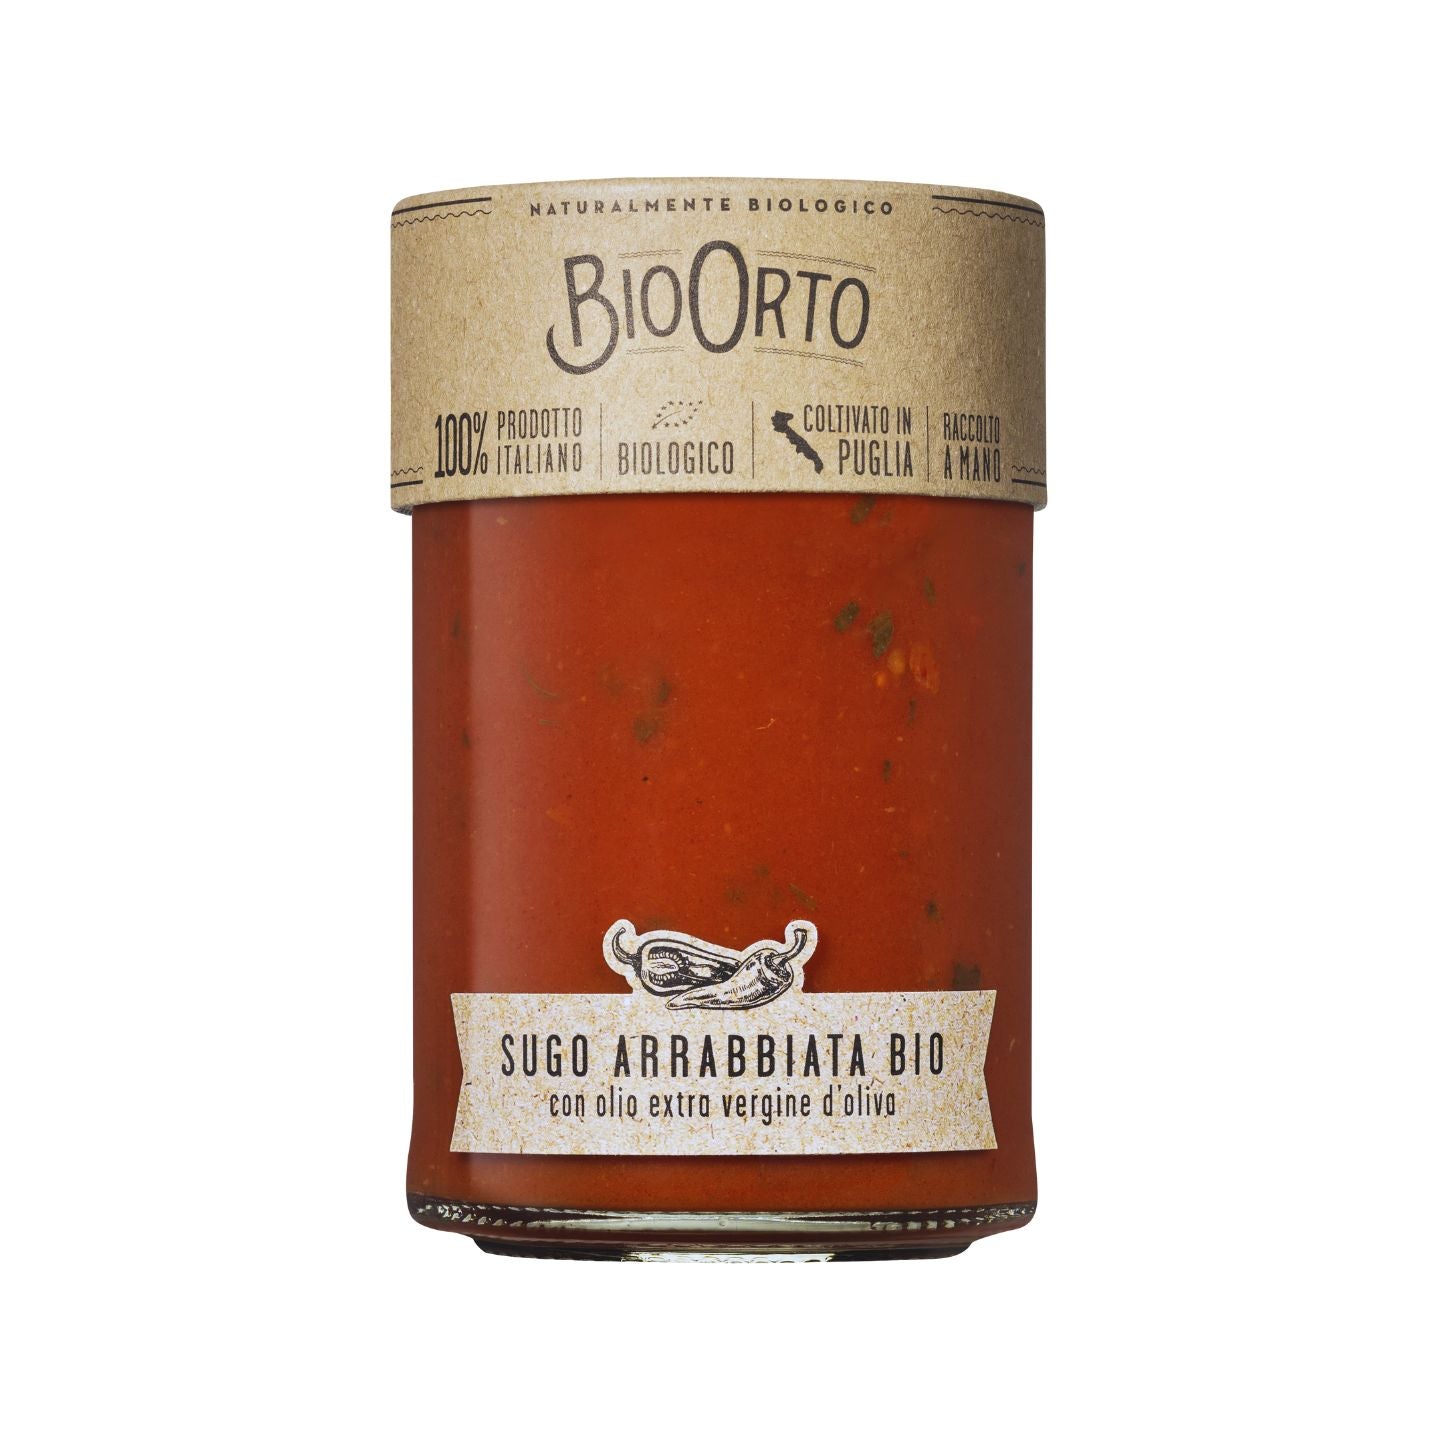 Bio Orto Organic Arrabbiata Pasta Sauce 350g  | Imported and distributed in the UK by Just Gourmet Foods